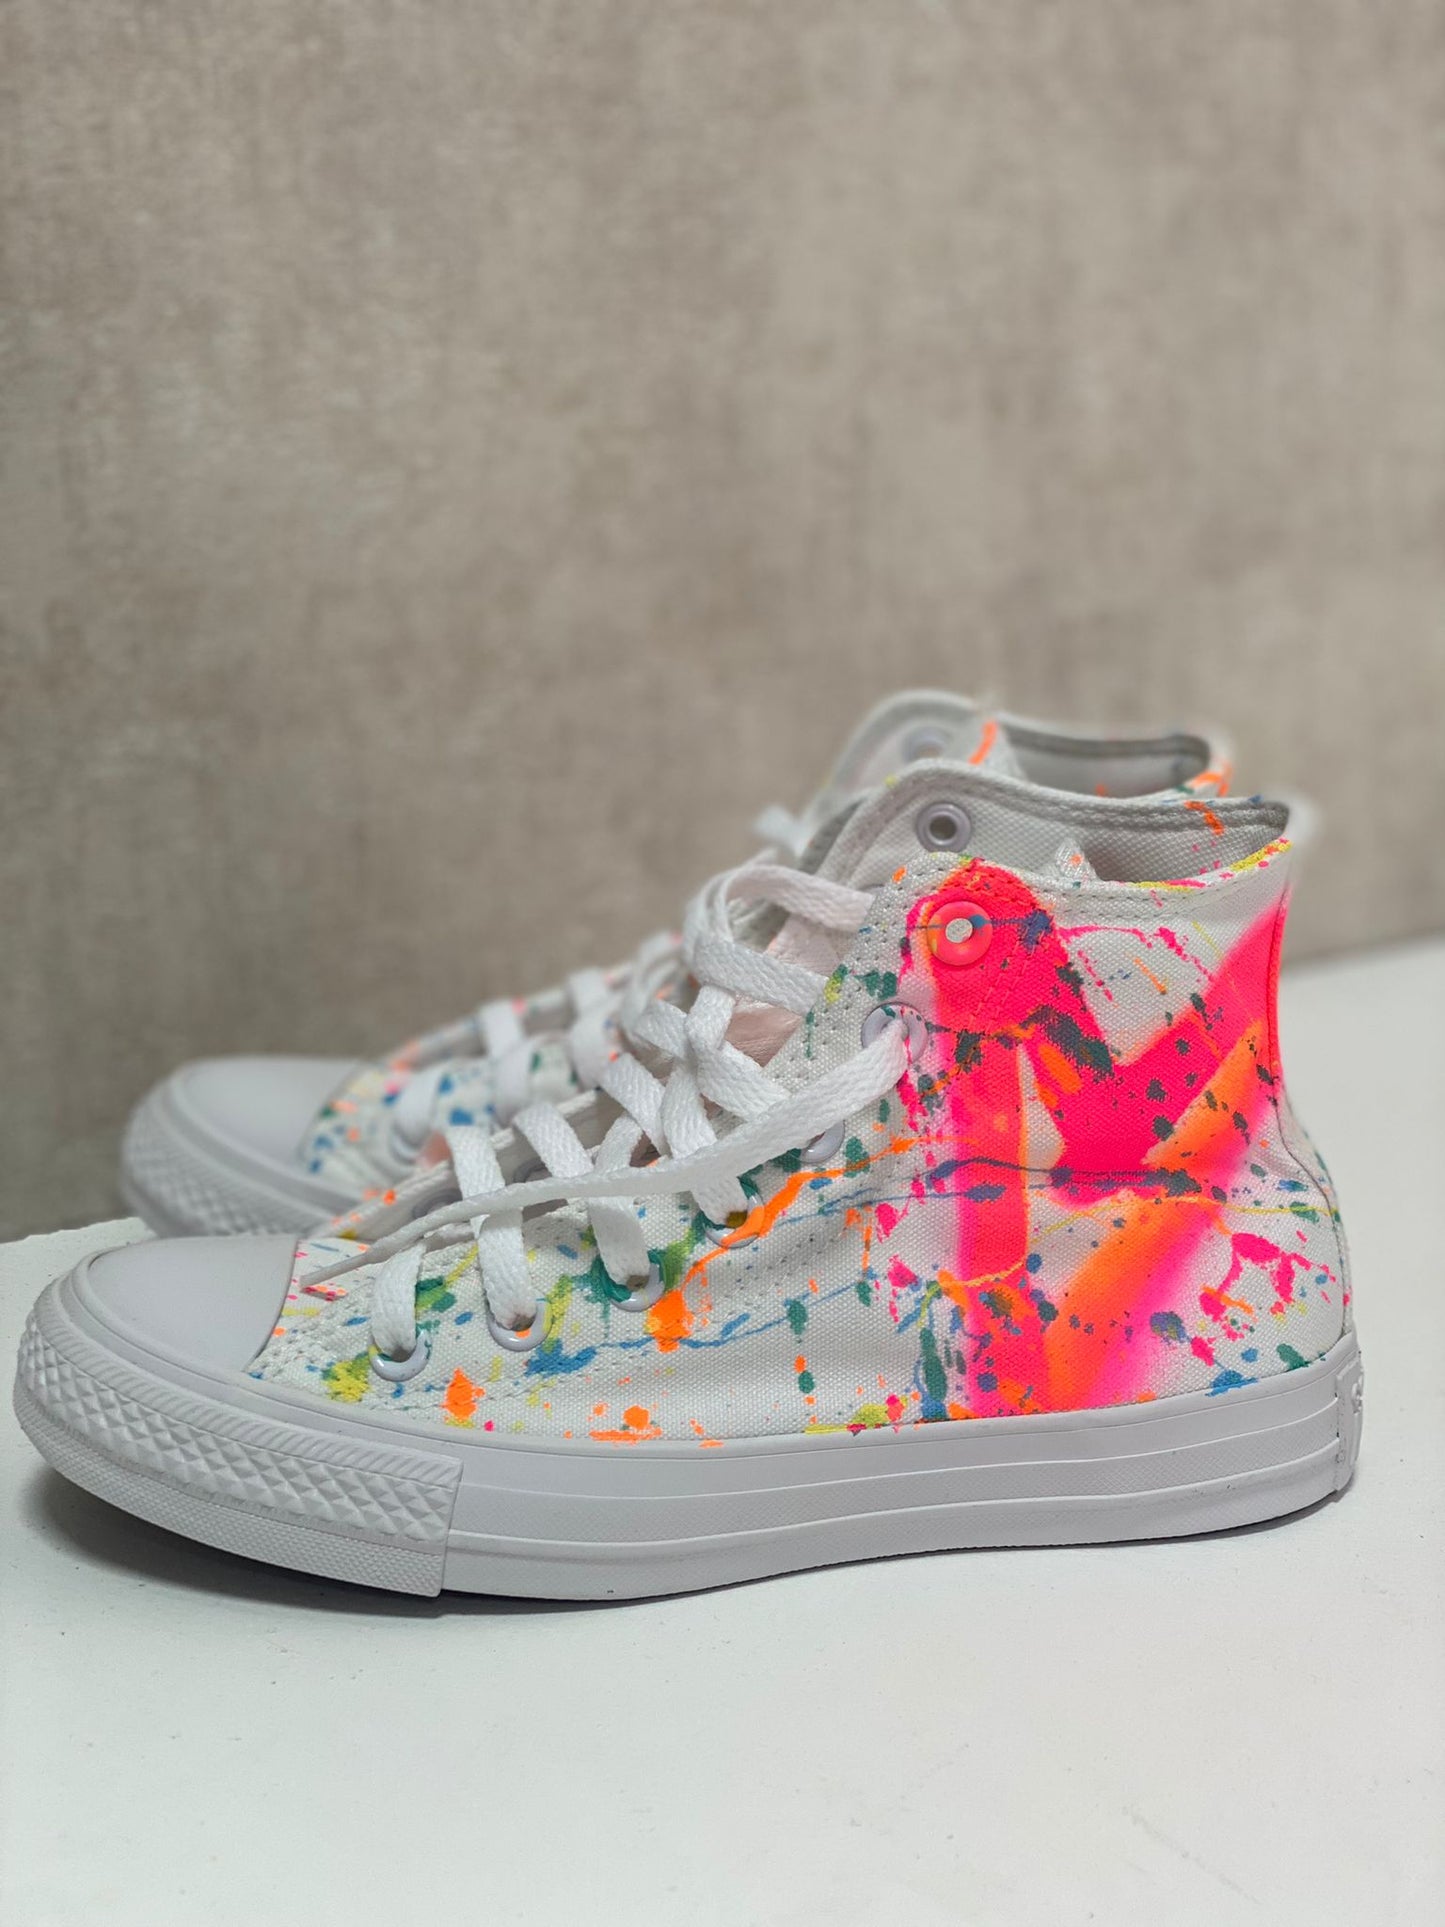 Spray Painted Converse High Tops